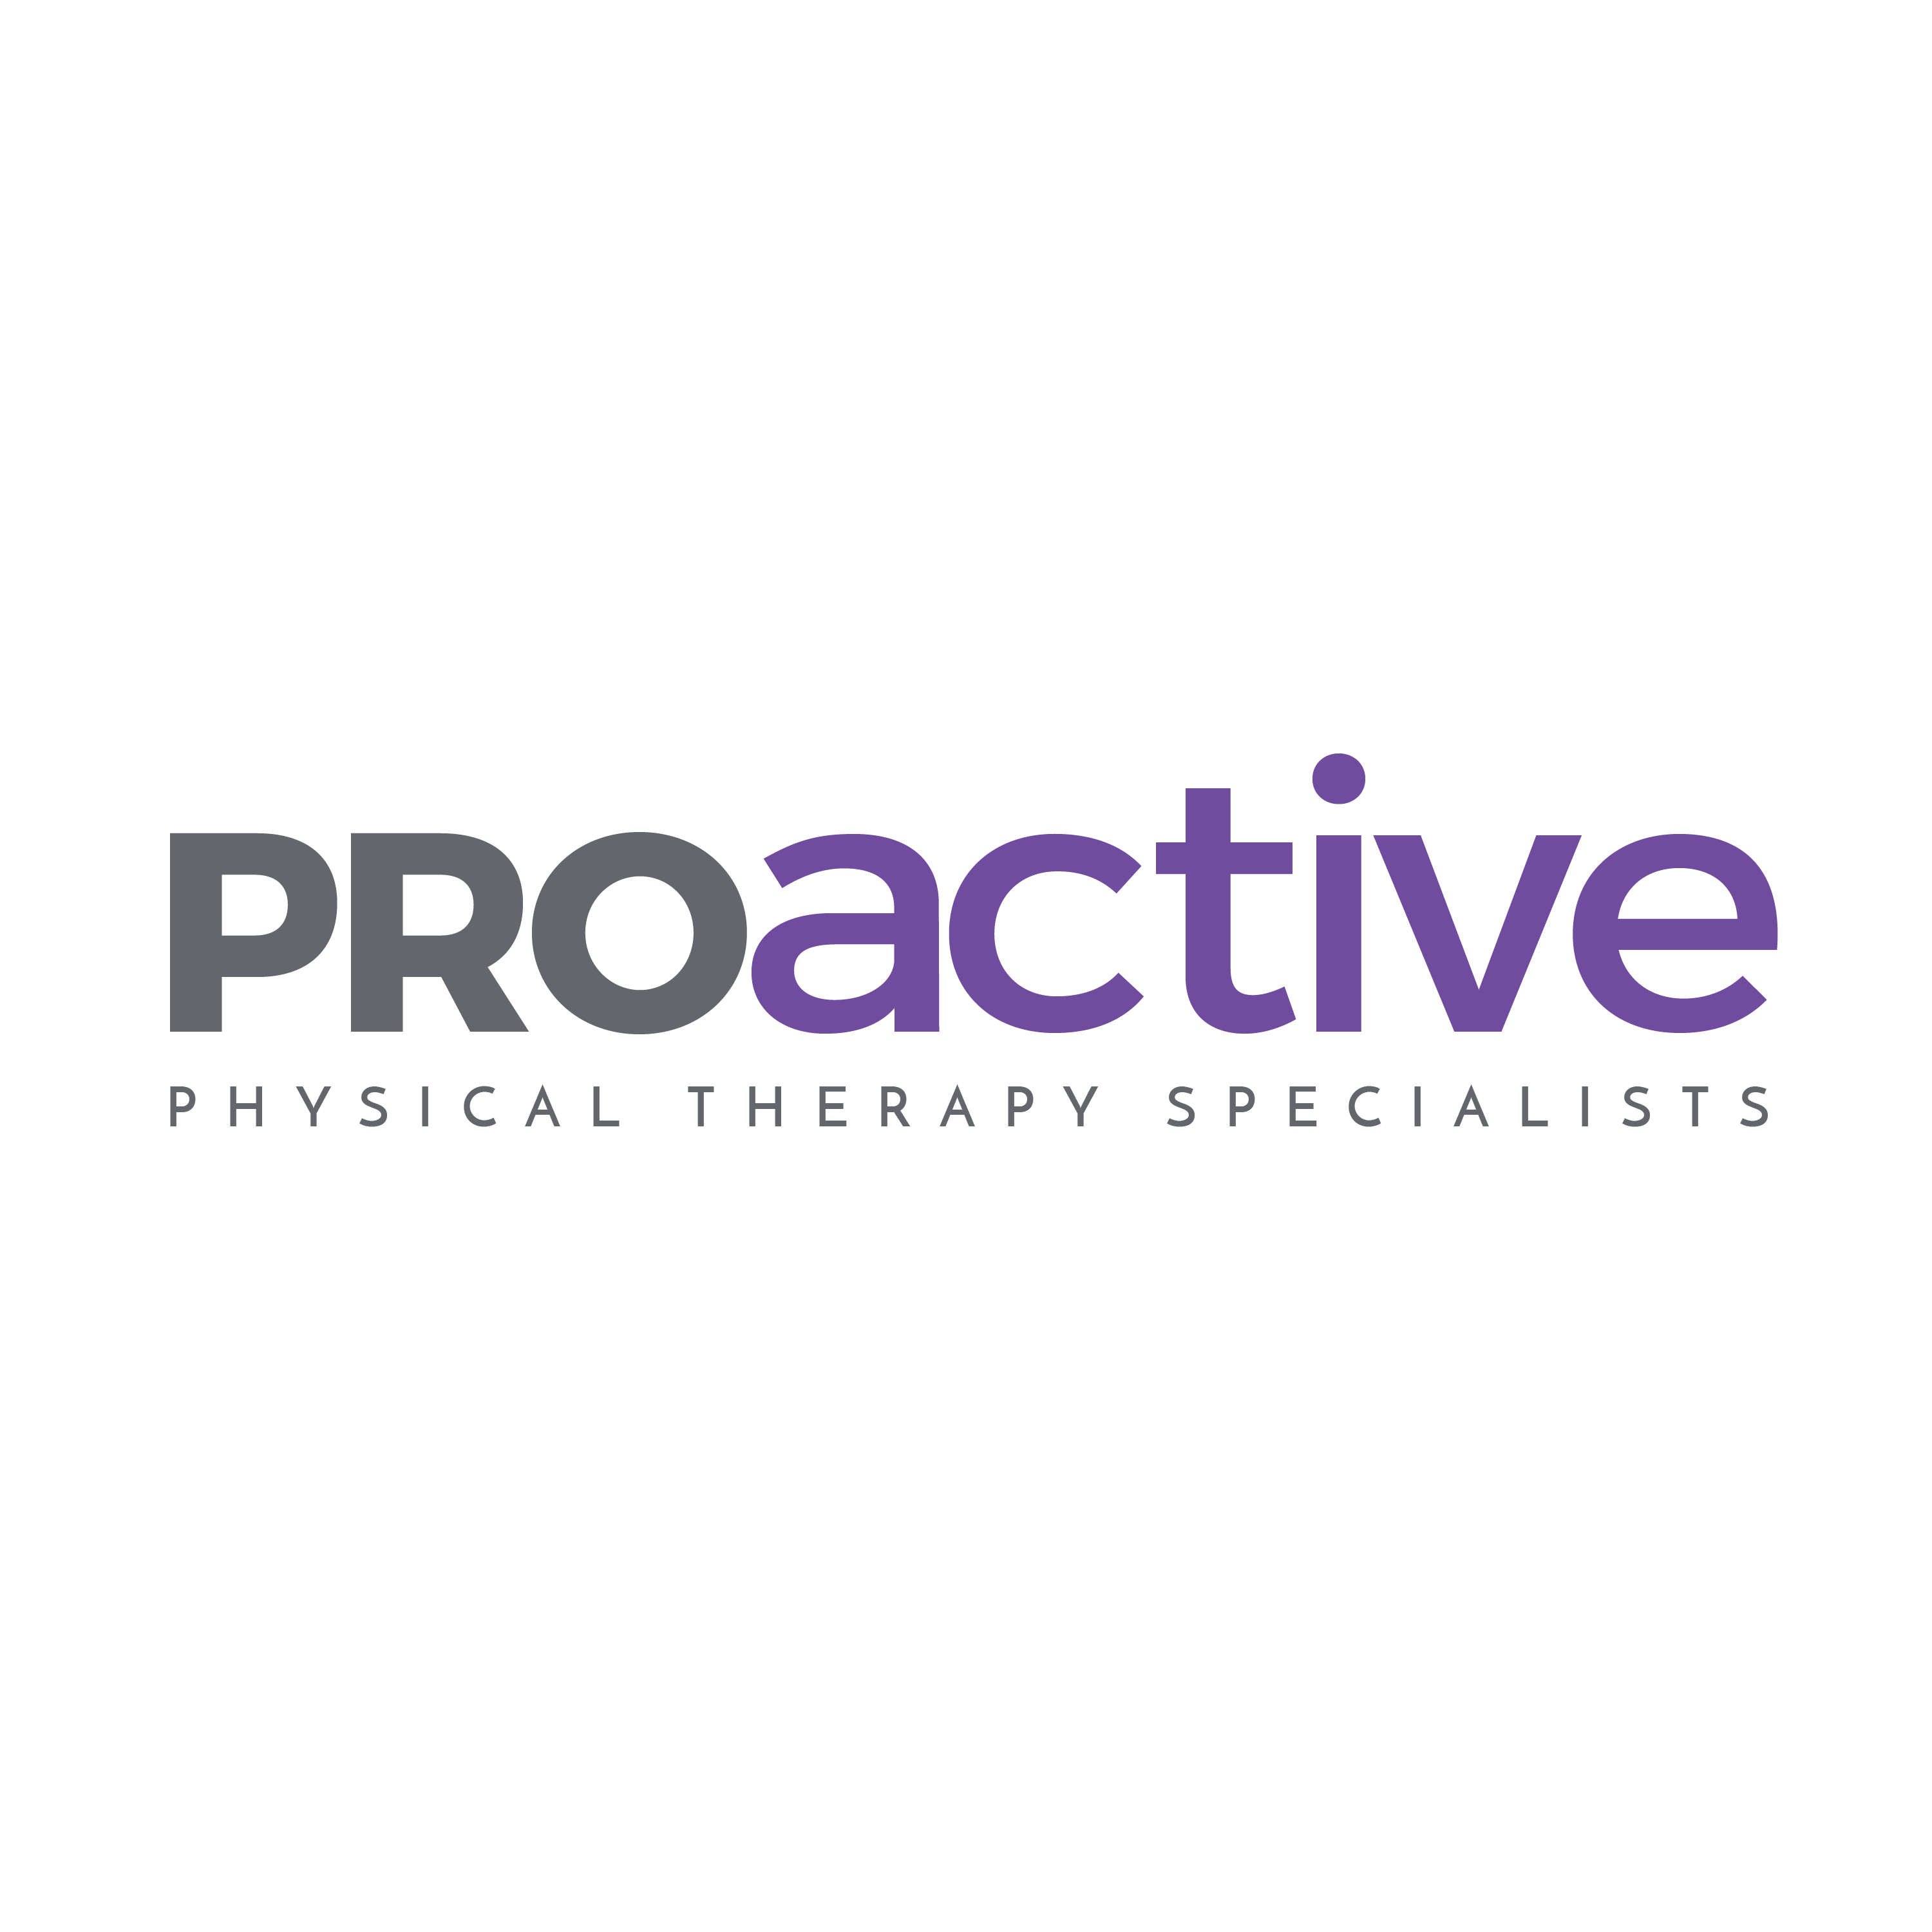 ProActive Physical Therapy Specialists